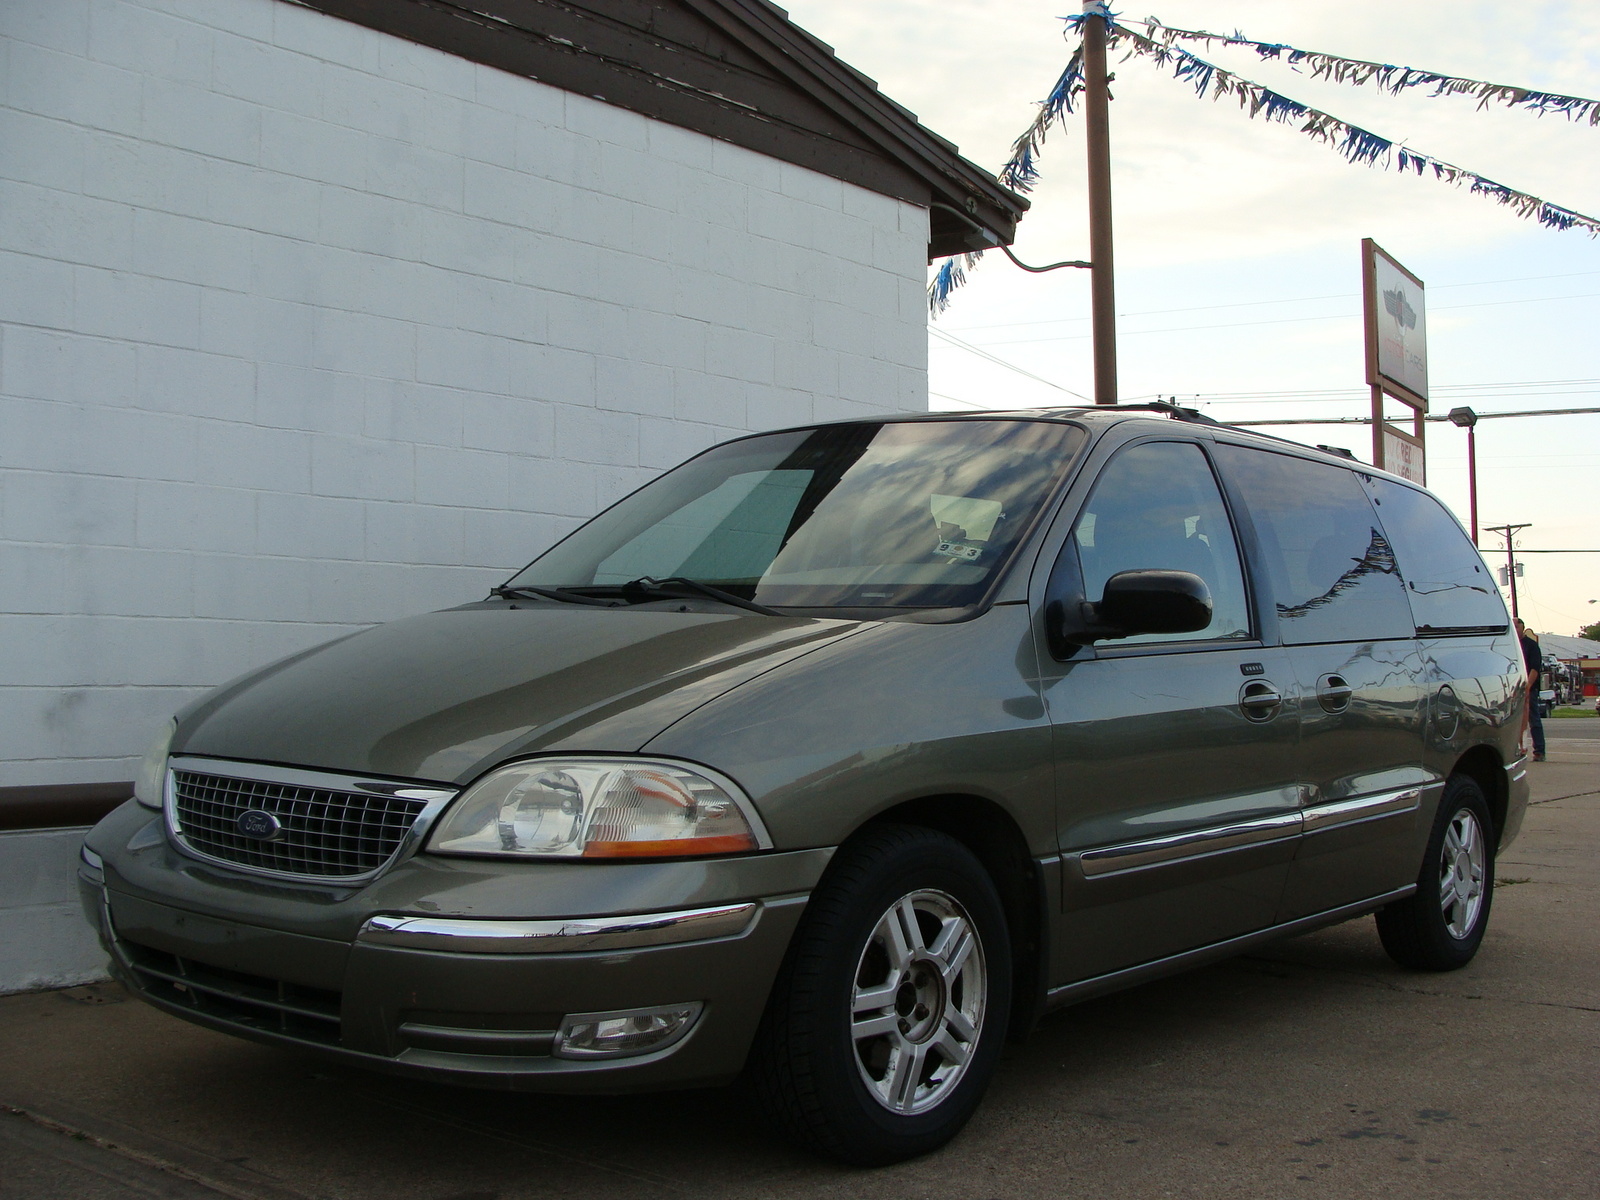 2001 Ford windstar limited reviews #2